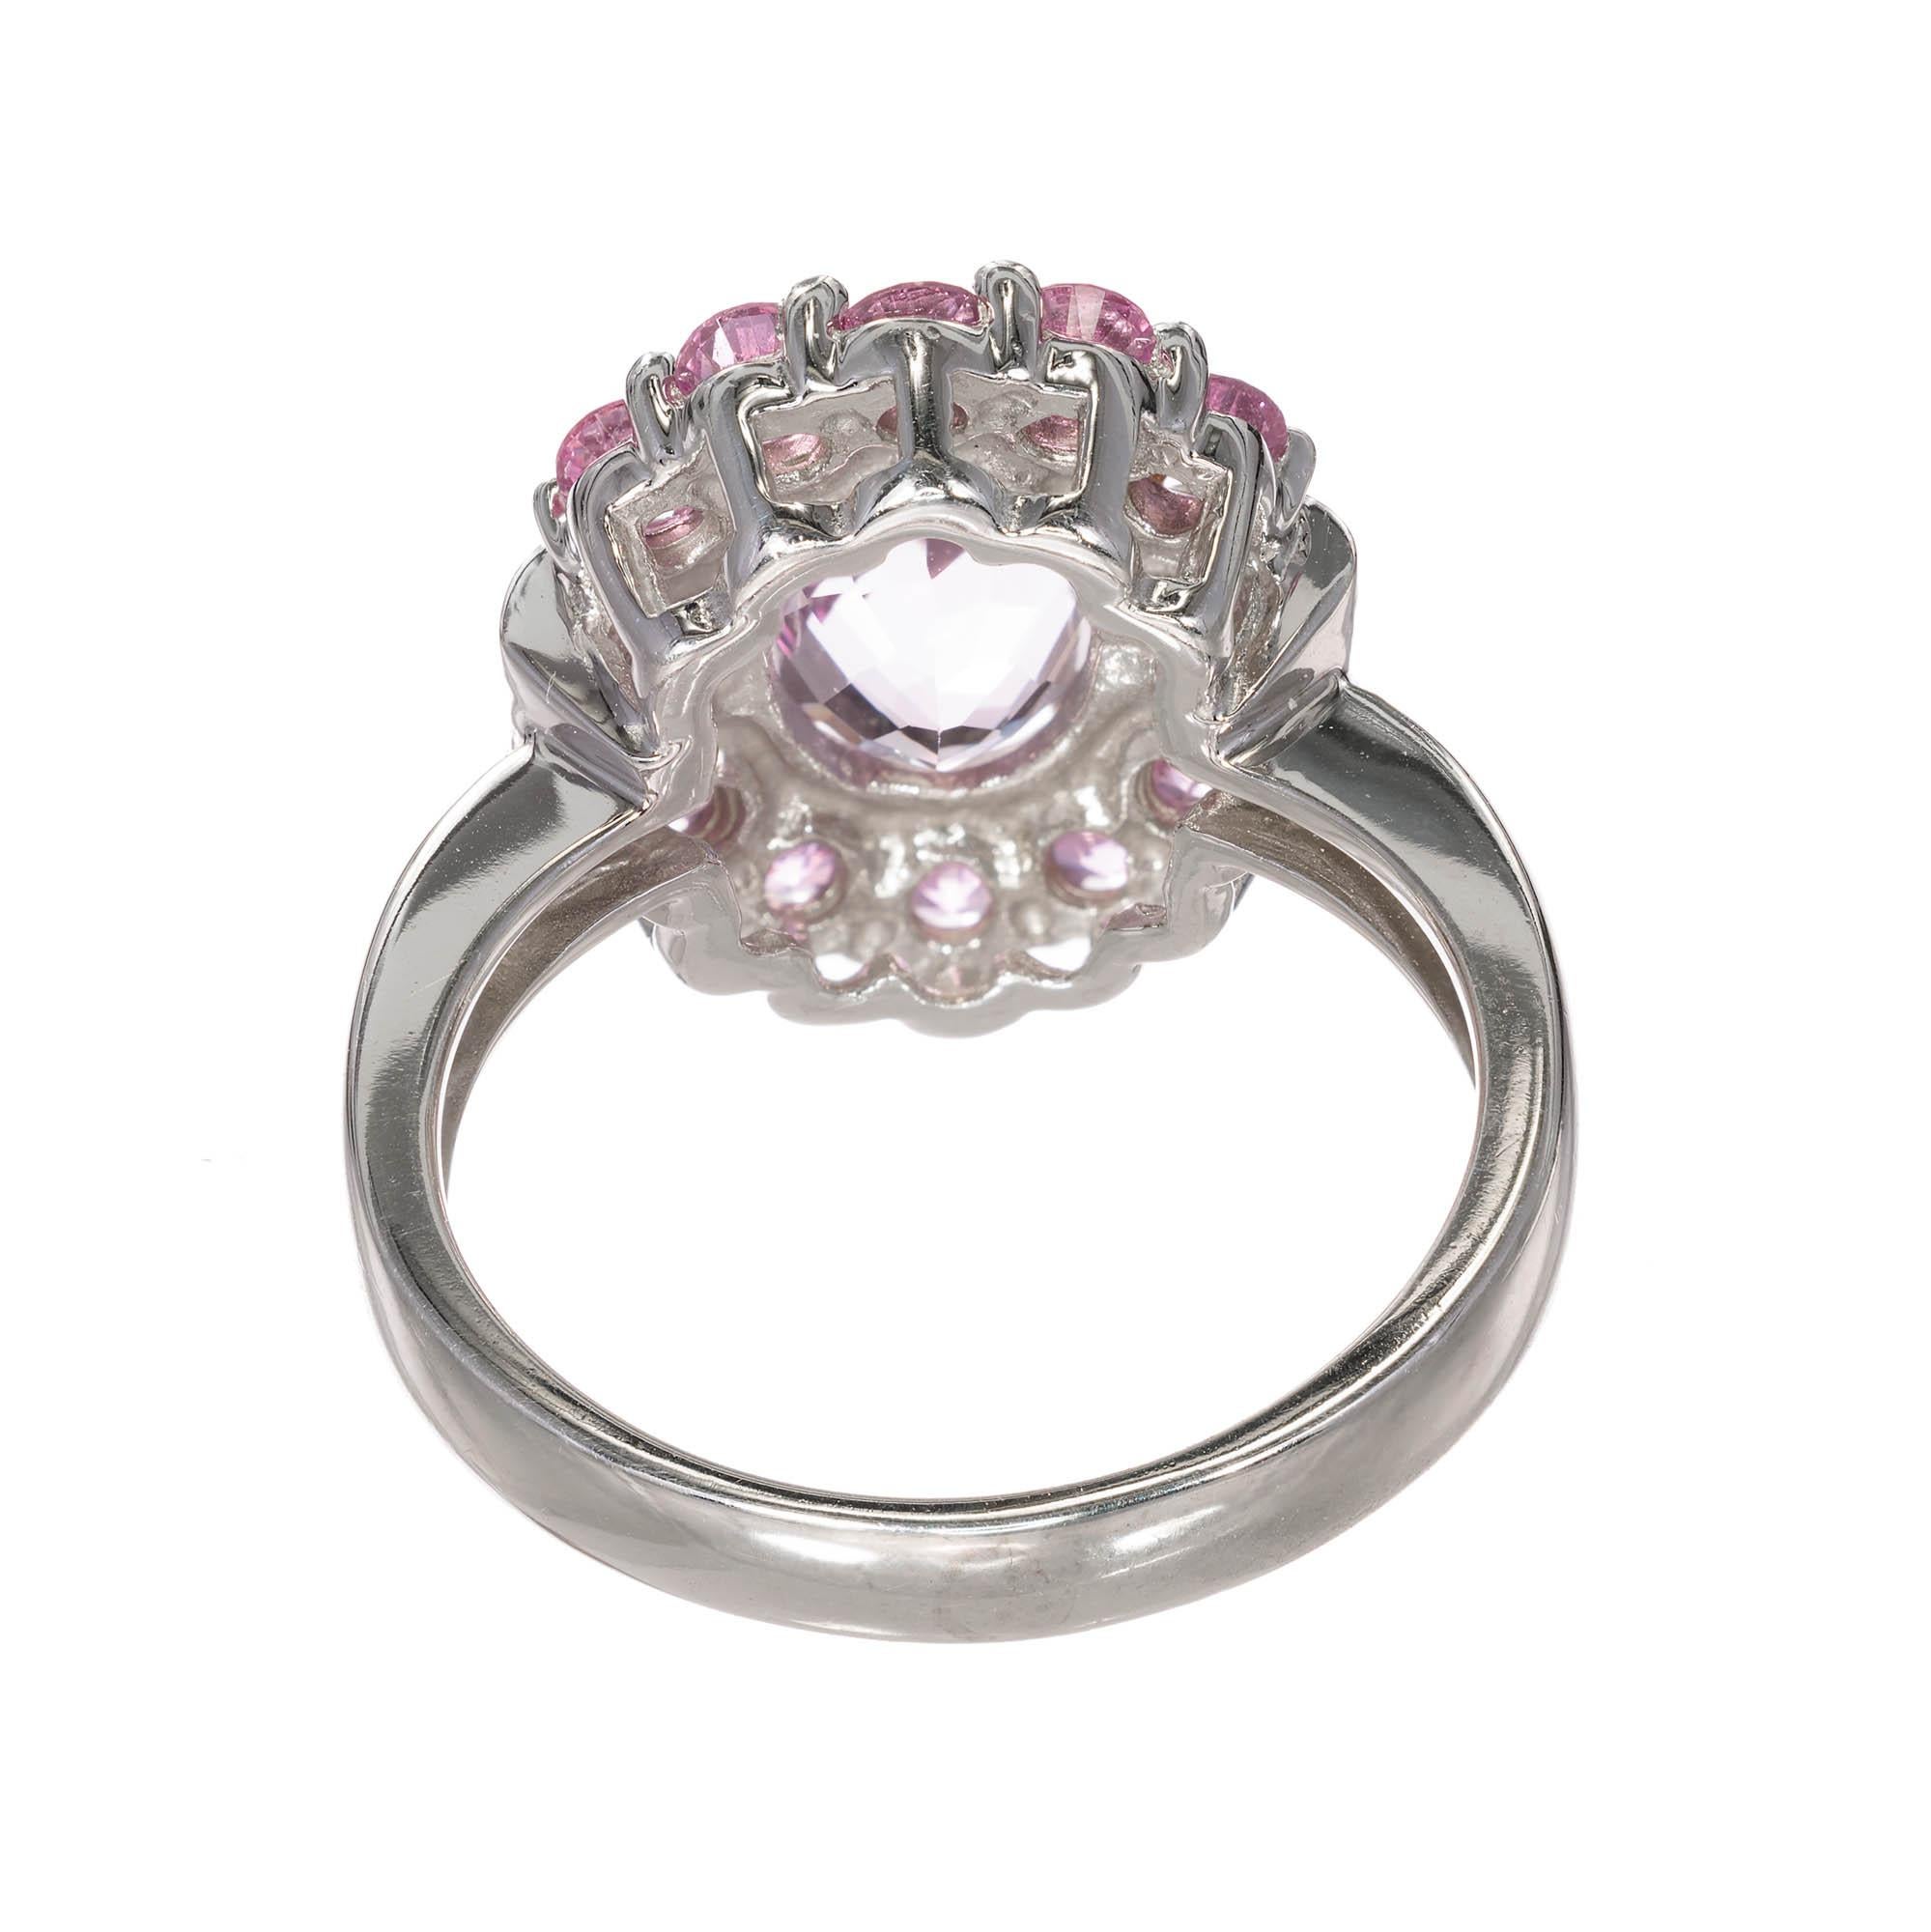 2.75 Carat Amethyst Diamond Sapphire Halo White Gold Engagement Cocktail Ring In Good Condition For Sale In Stamford, CT